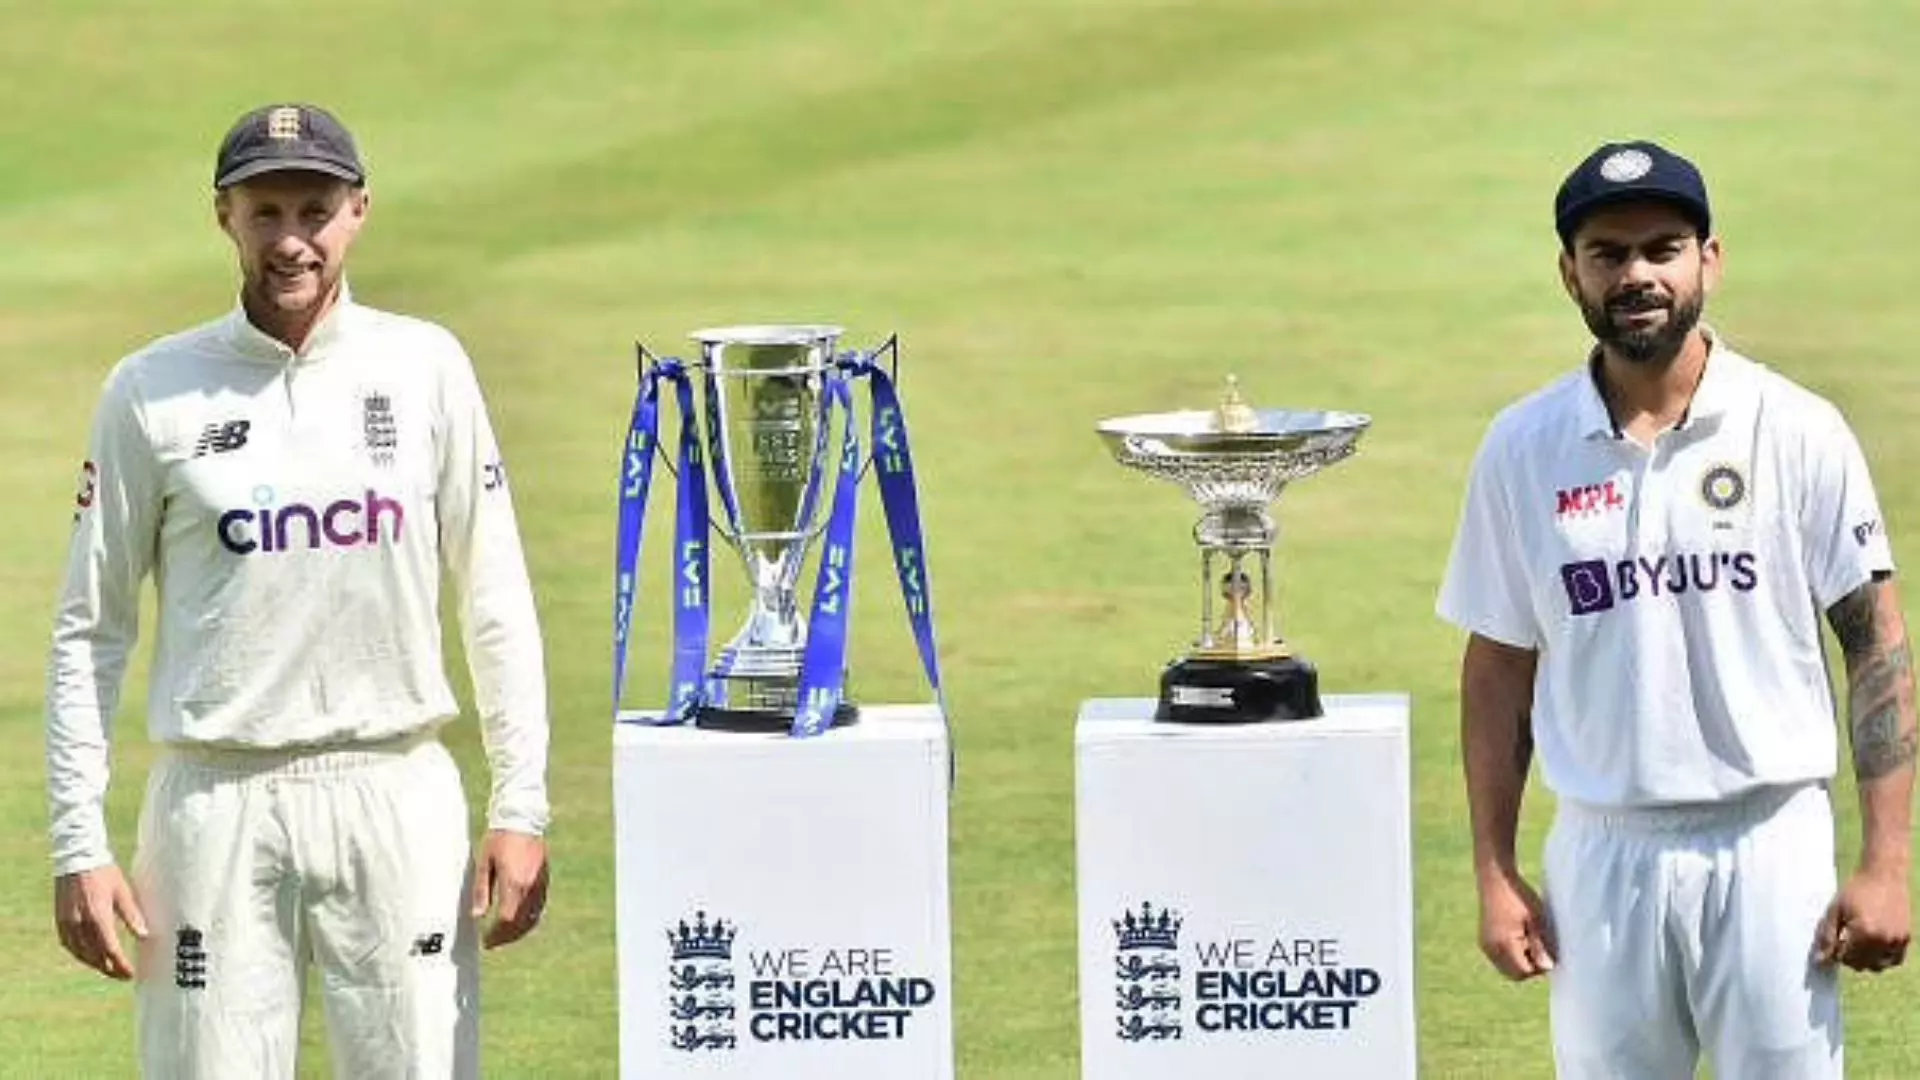 England Won The Toss Elected to Bowling in India vs England 4th Test